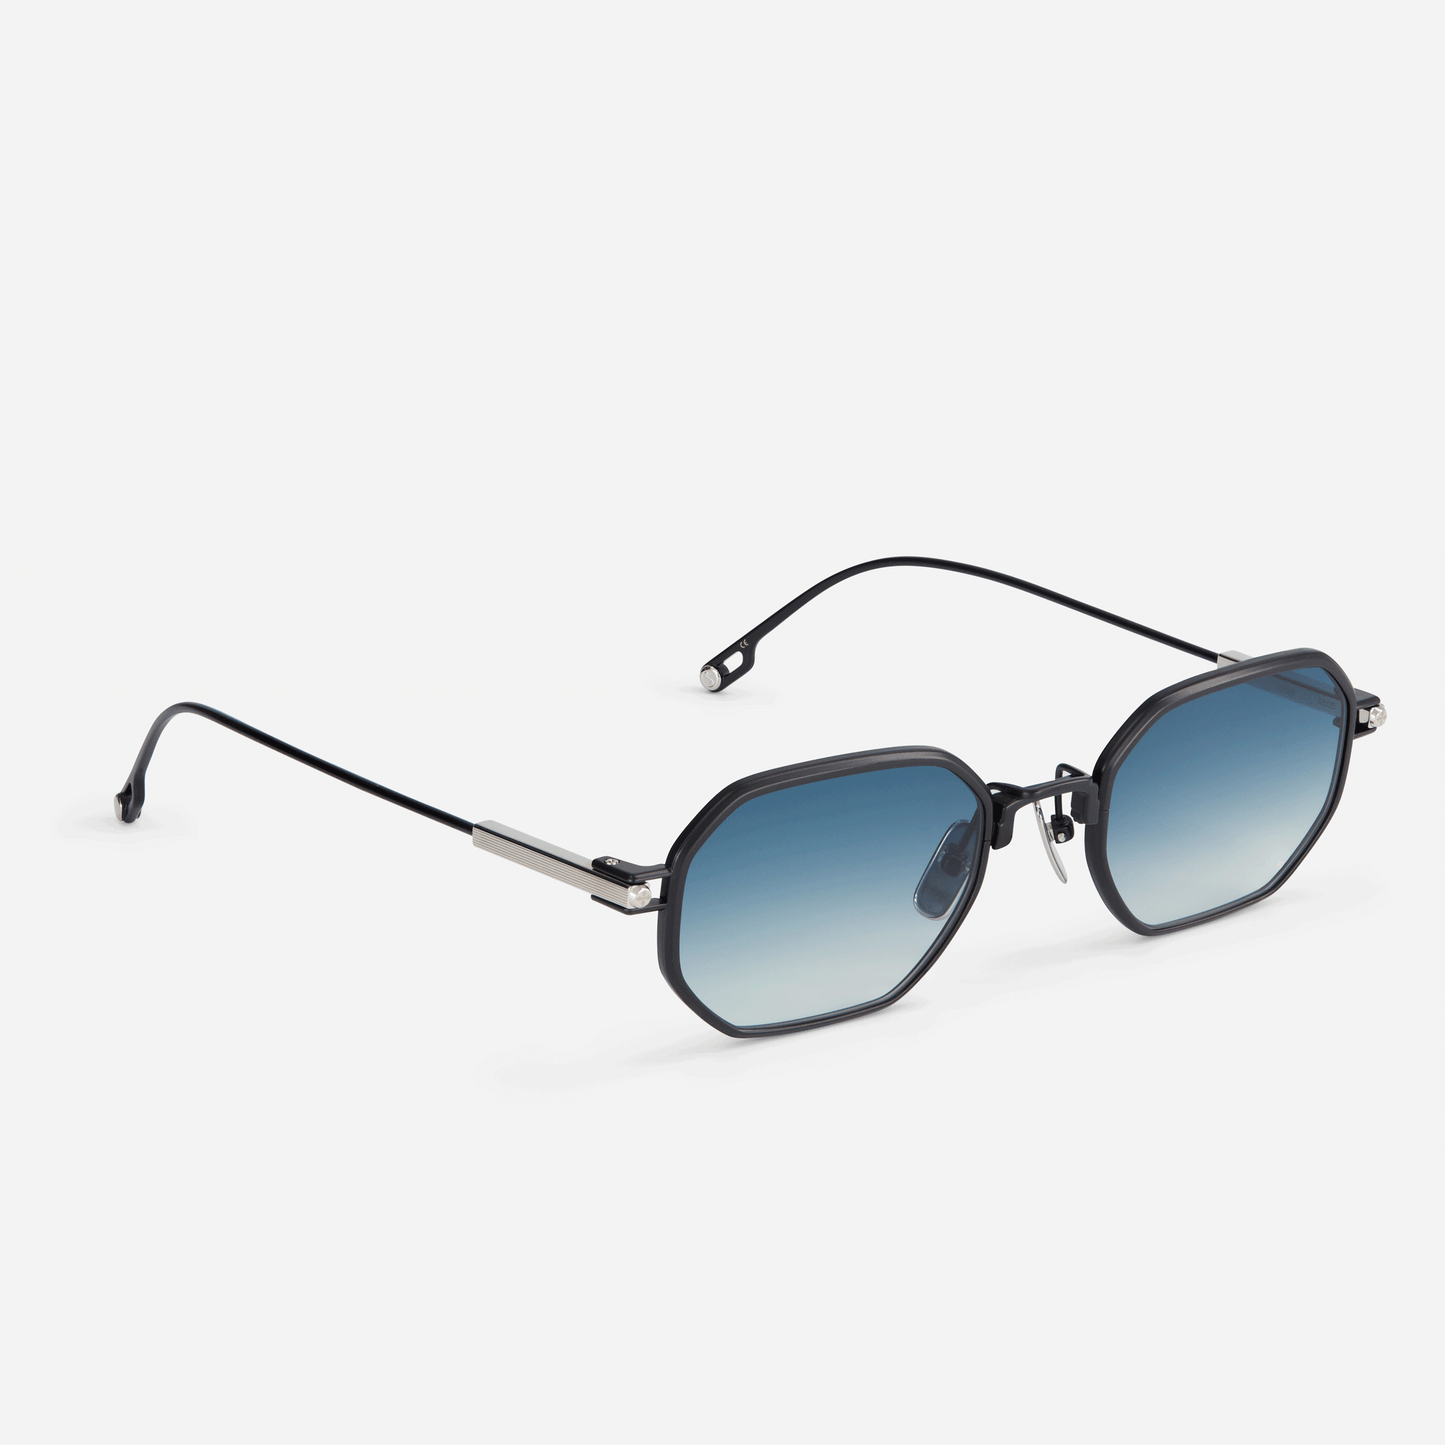 Timir S505 hexagonal glasses. These exquisitely crafted eyewear pieces, made from pure black titanium, feature stunning blue gradient tinted lenses, perfect for both men and women seeking style and sophistication.